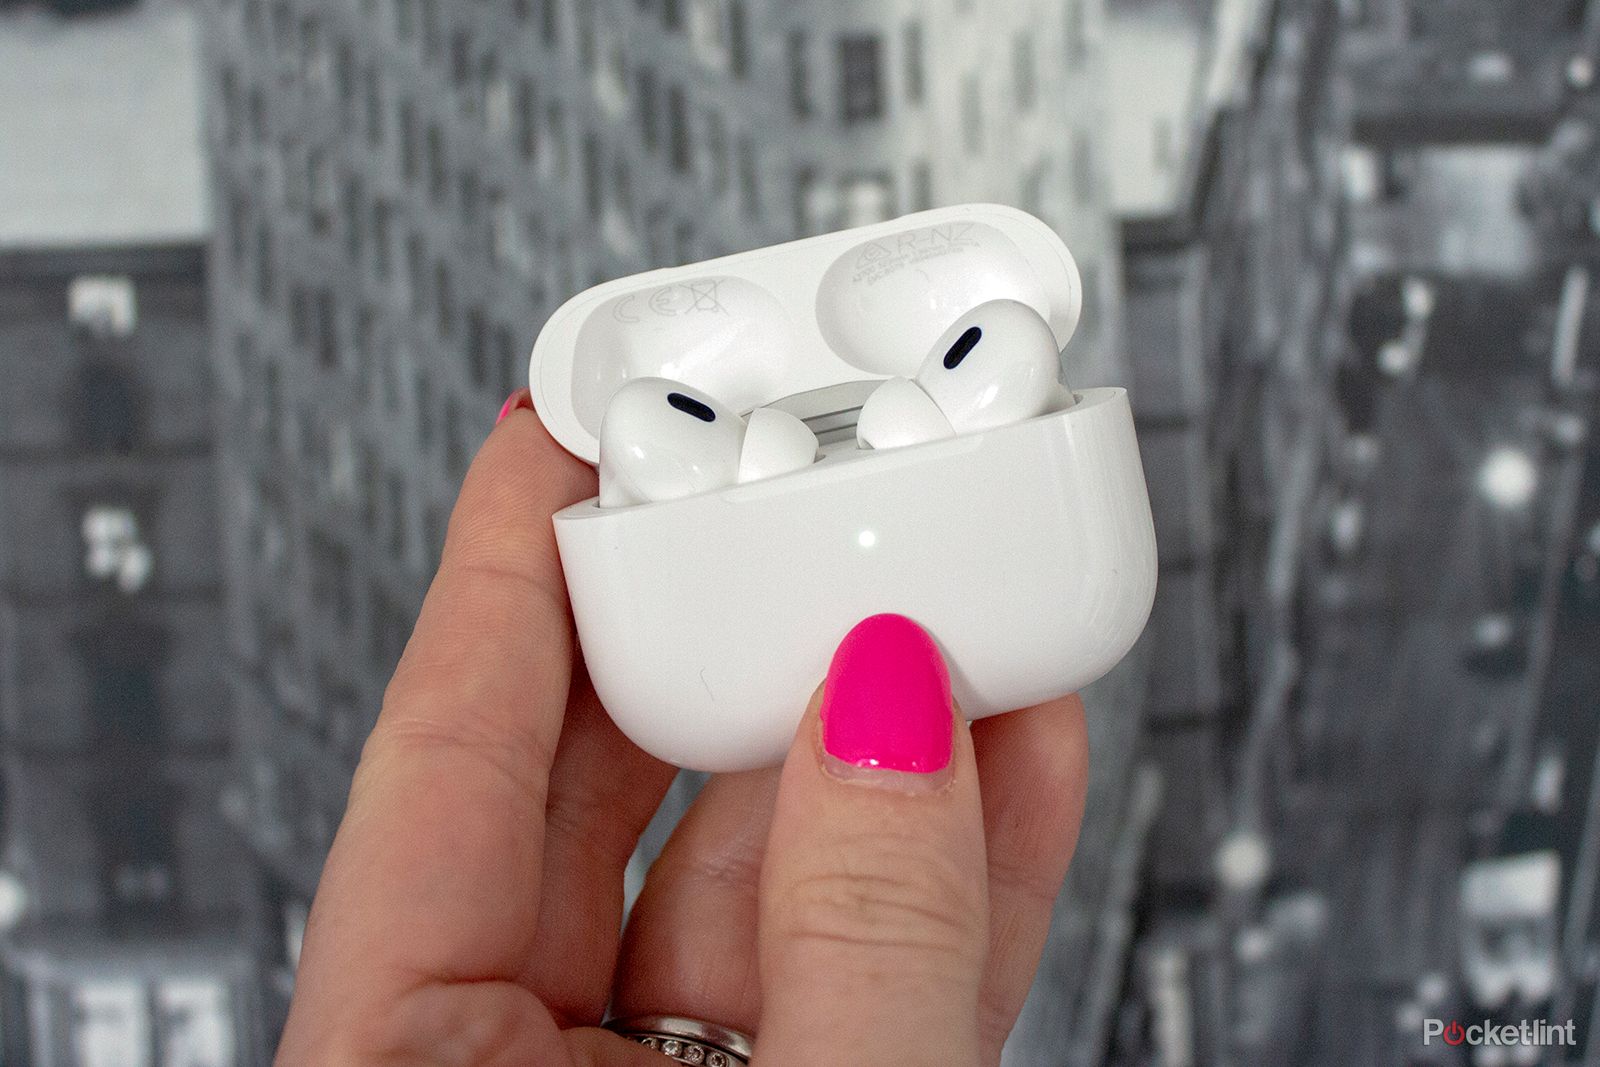 You might have missed this important AirPods announcement at Apple’s iPhone 15 launch